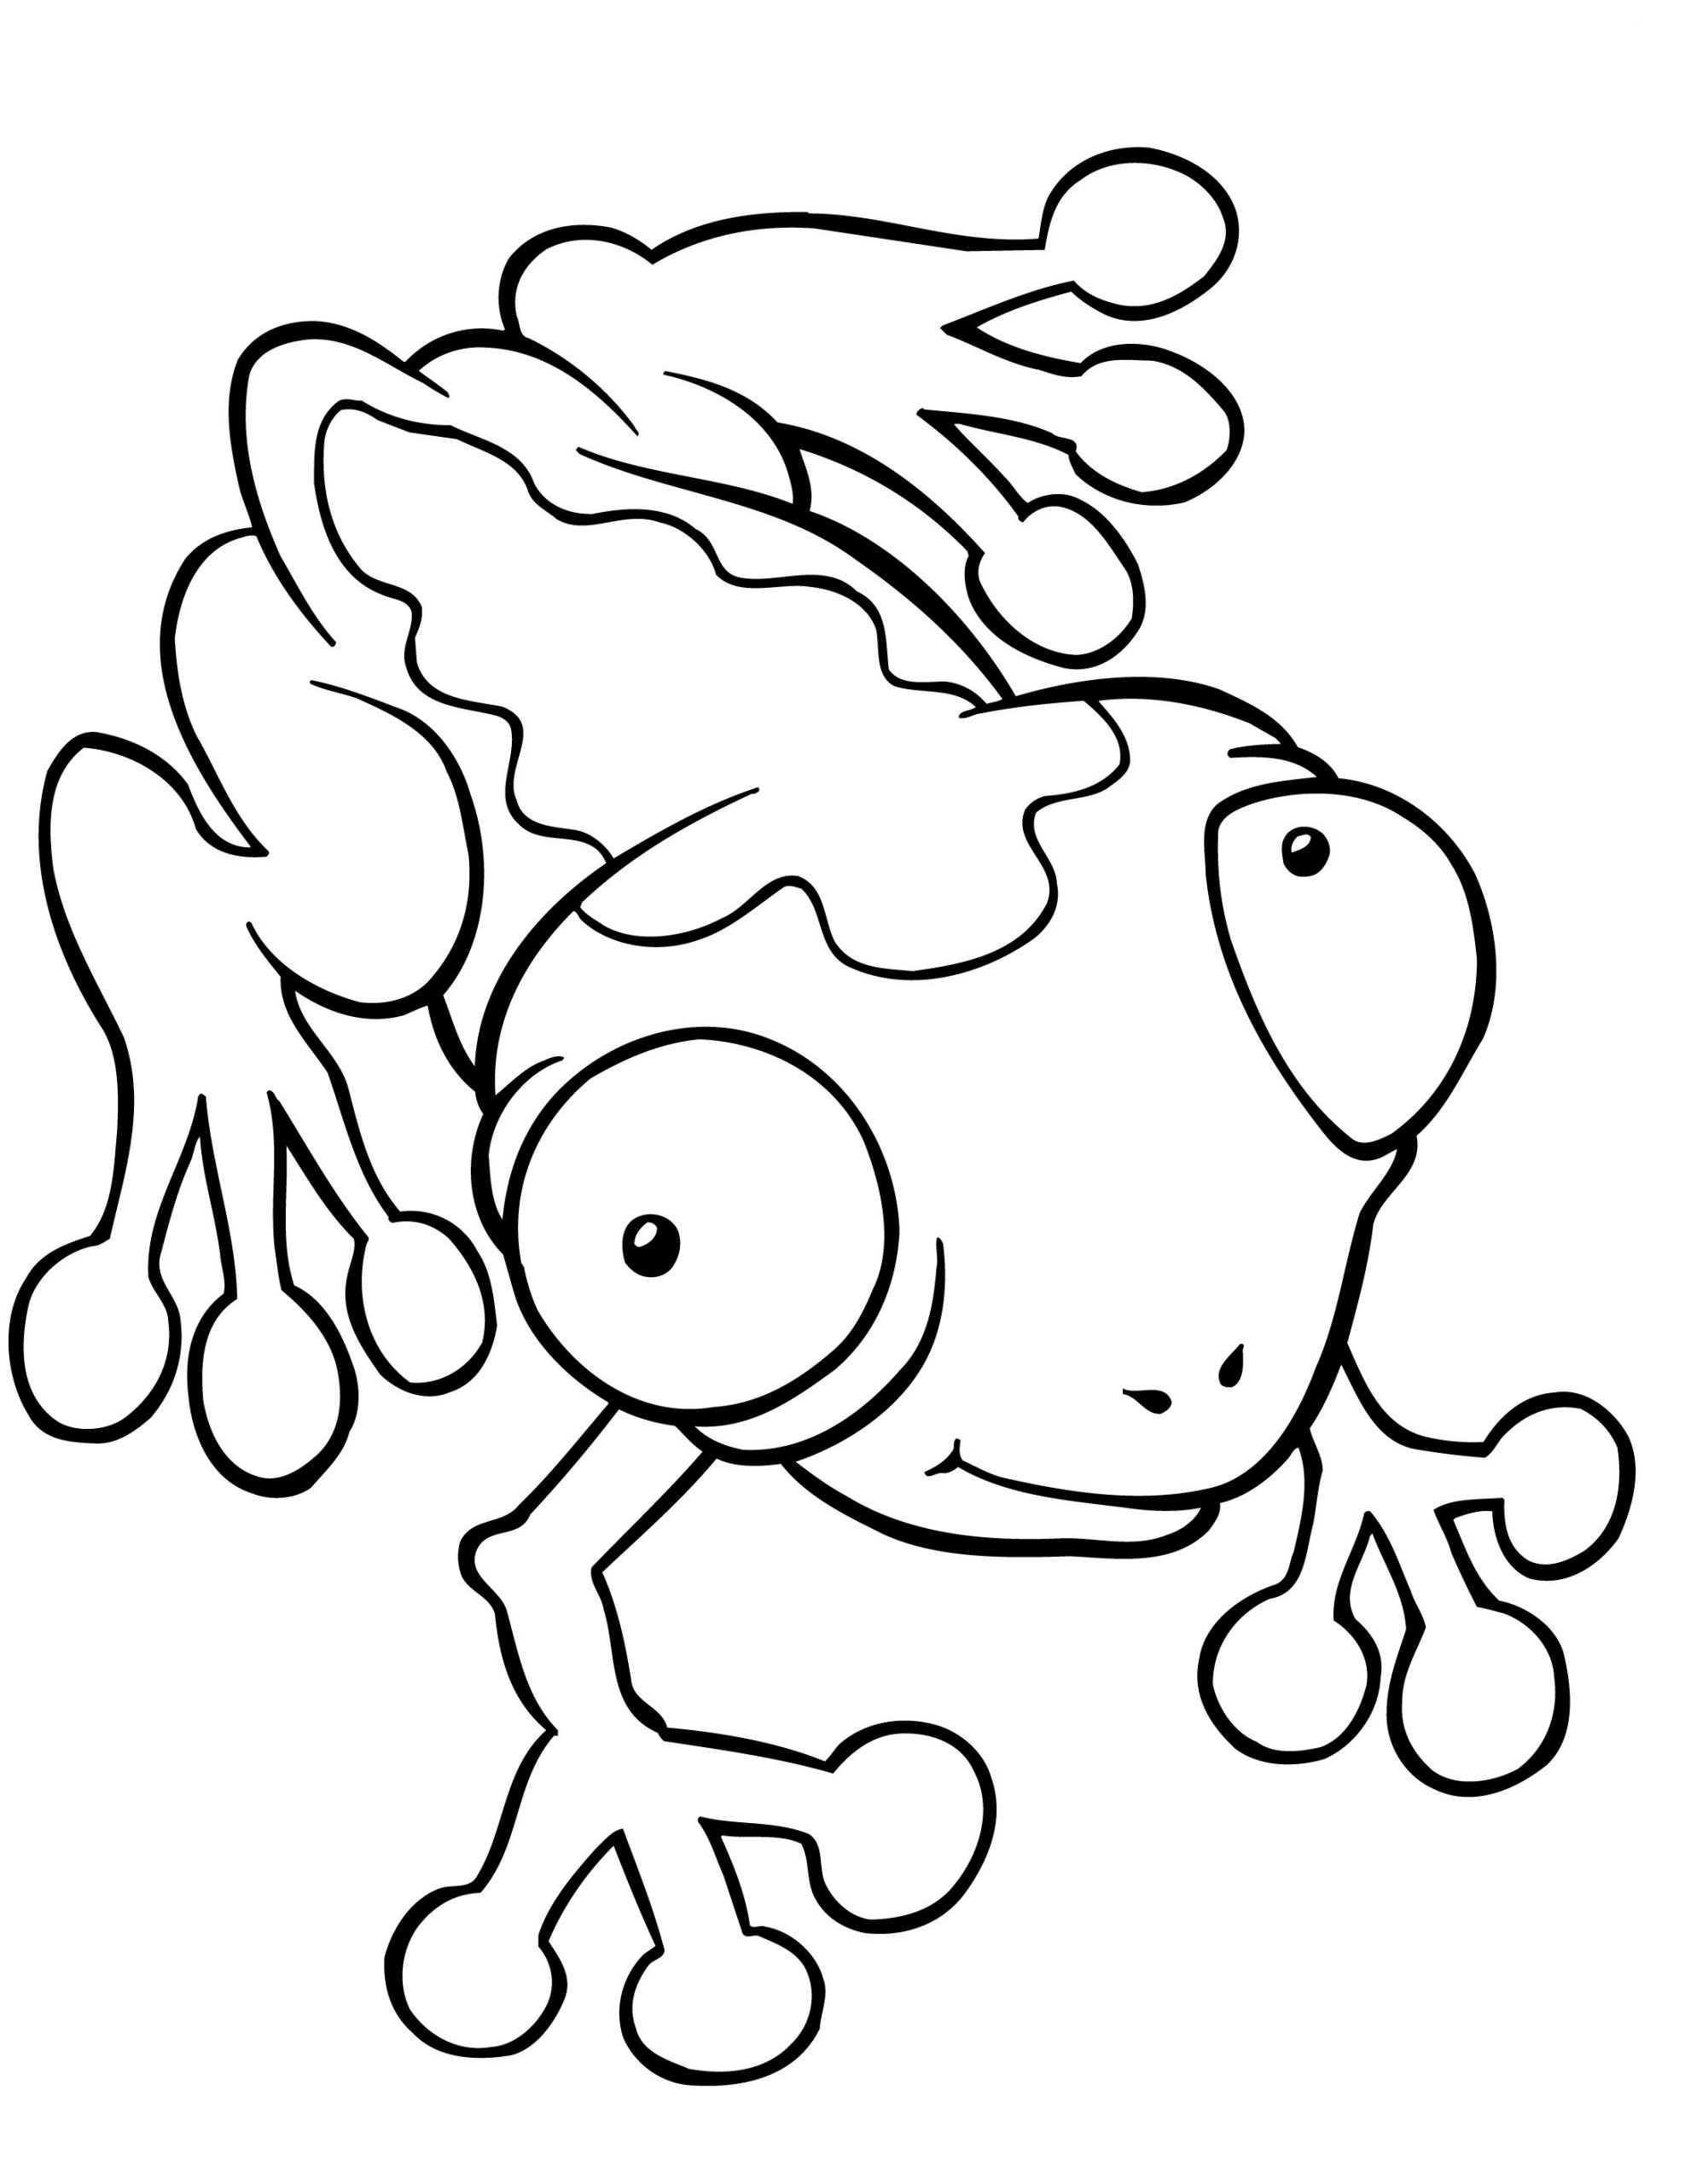 Frog Coloring Pages For Kids
 Frog Coloring Pages Kidsuki